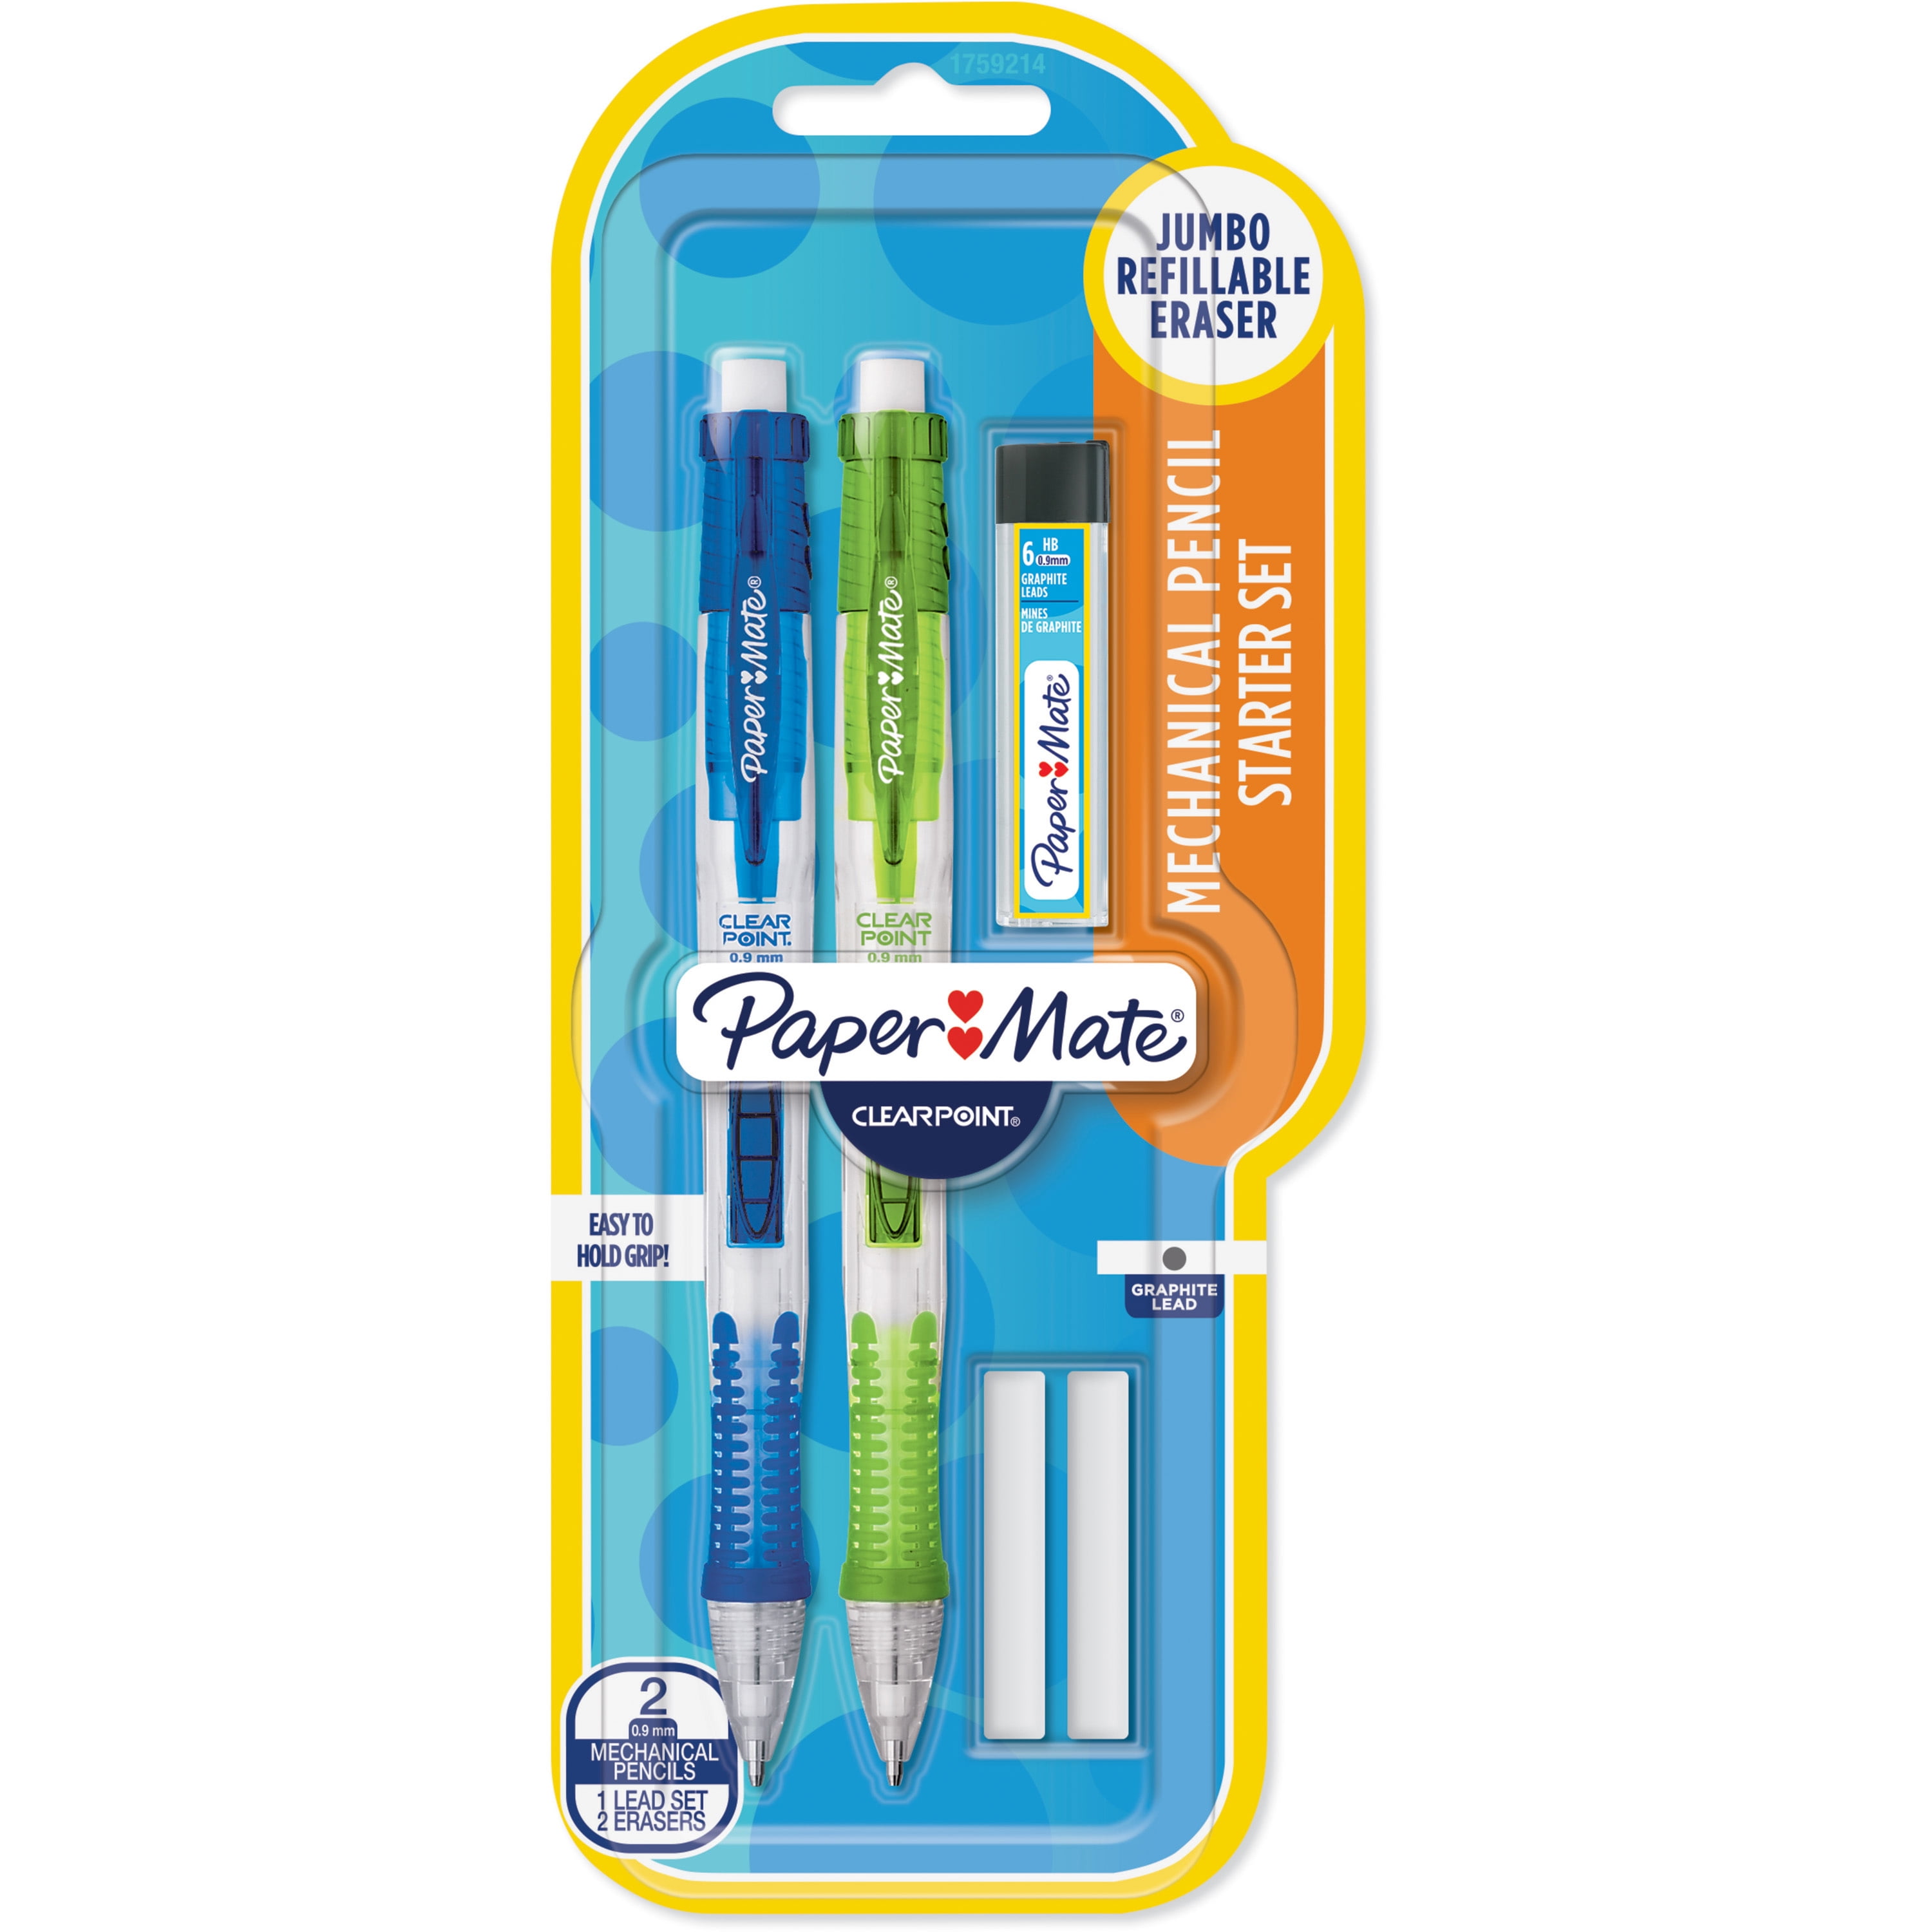 Haile Mechanical Pencils Set Metal Pencil Marker With Lead Refill 0.3 0.5  0.7 0.9 1.3 2.0